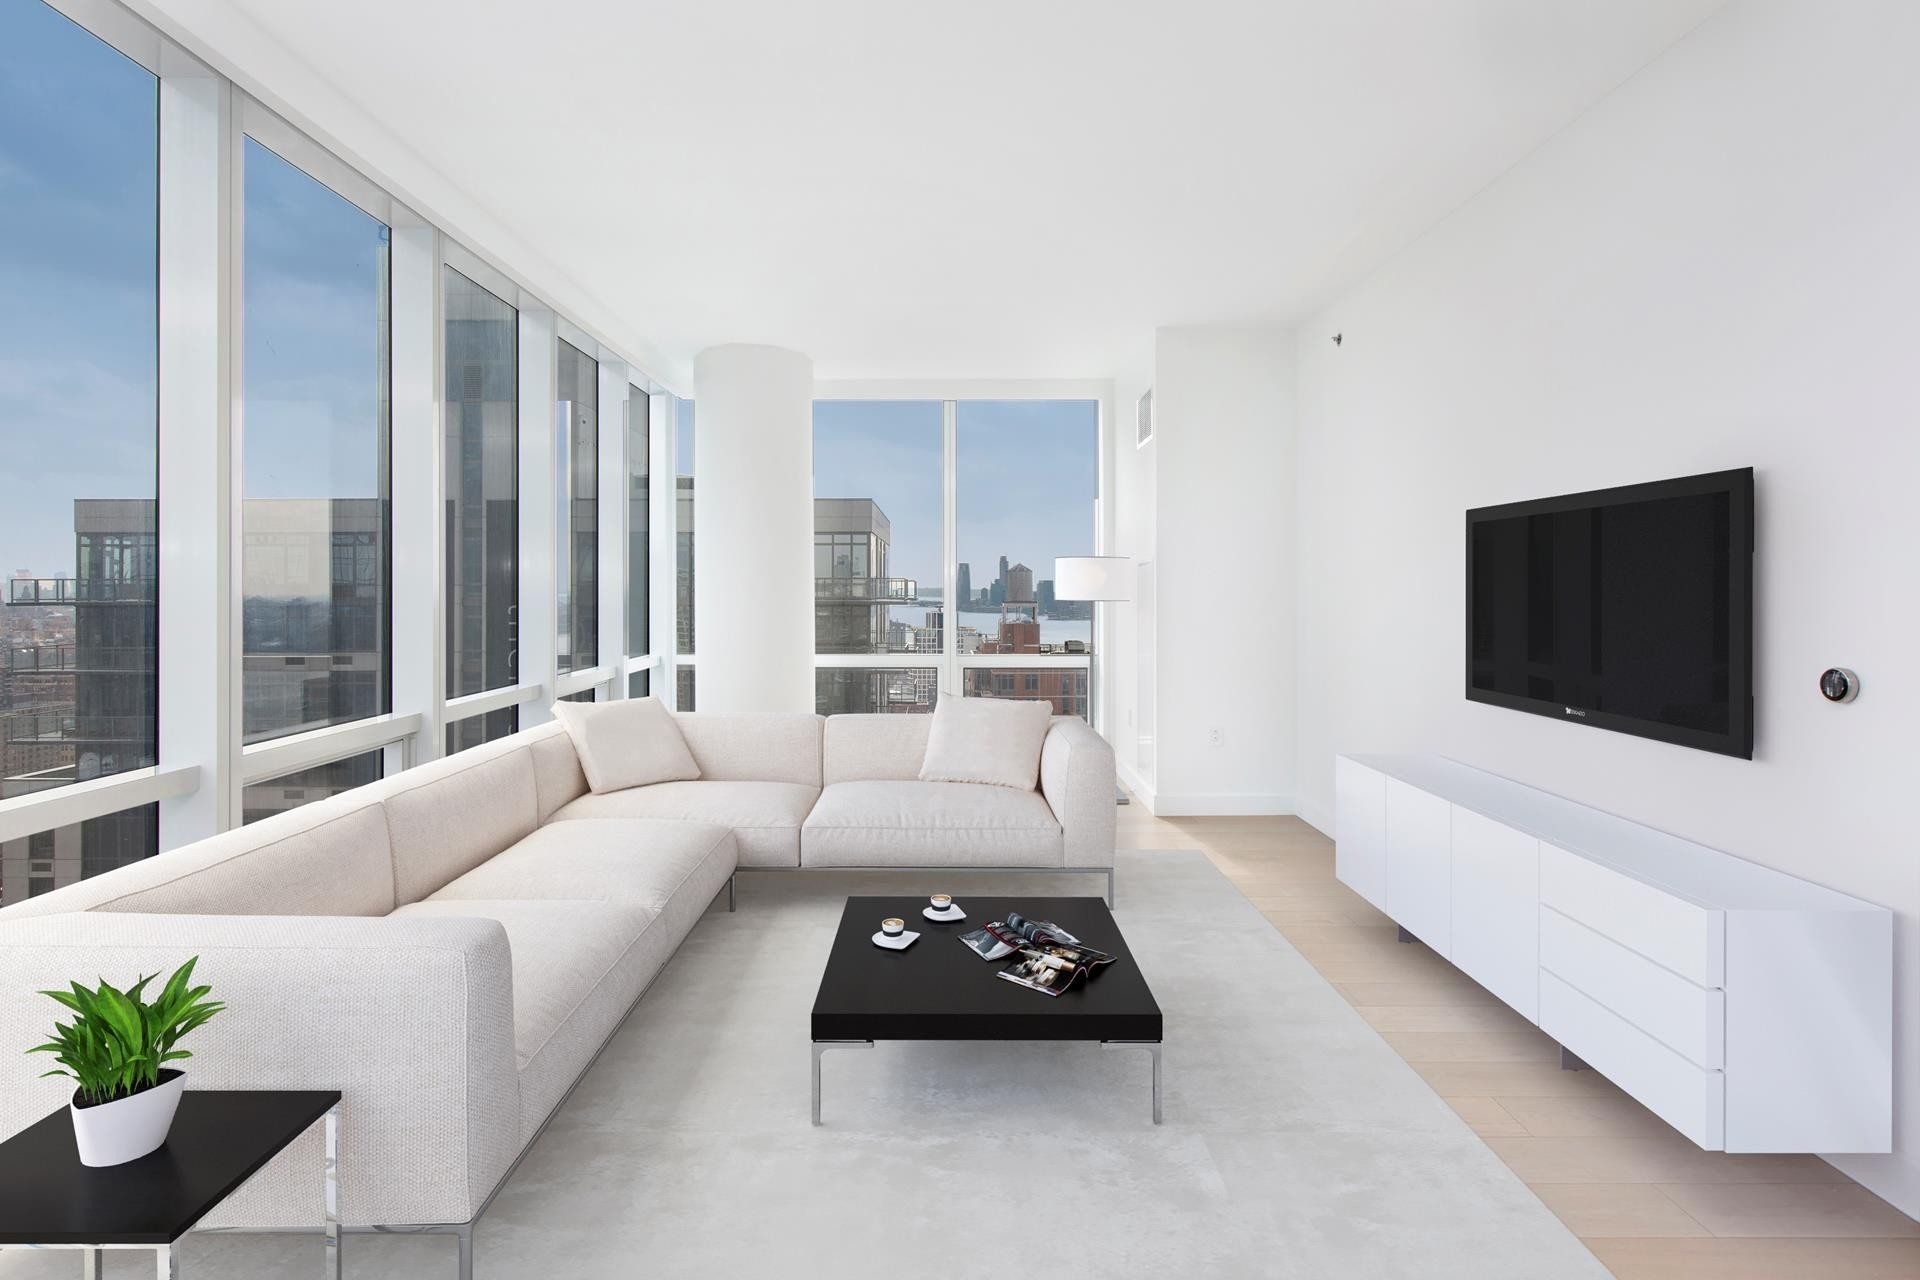 Condominium for Sale at Fifteen Hudson Yards, 15 HUDSON YARDS, 31A Hudson Yards, New York, NY 10001